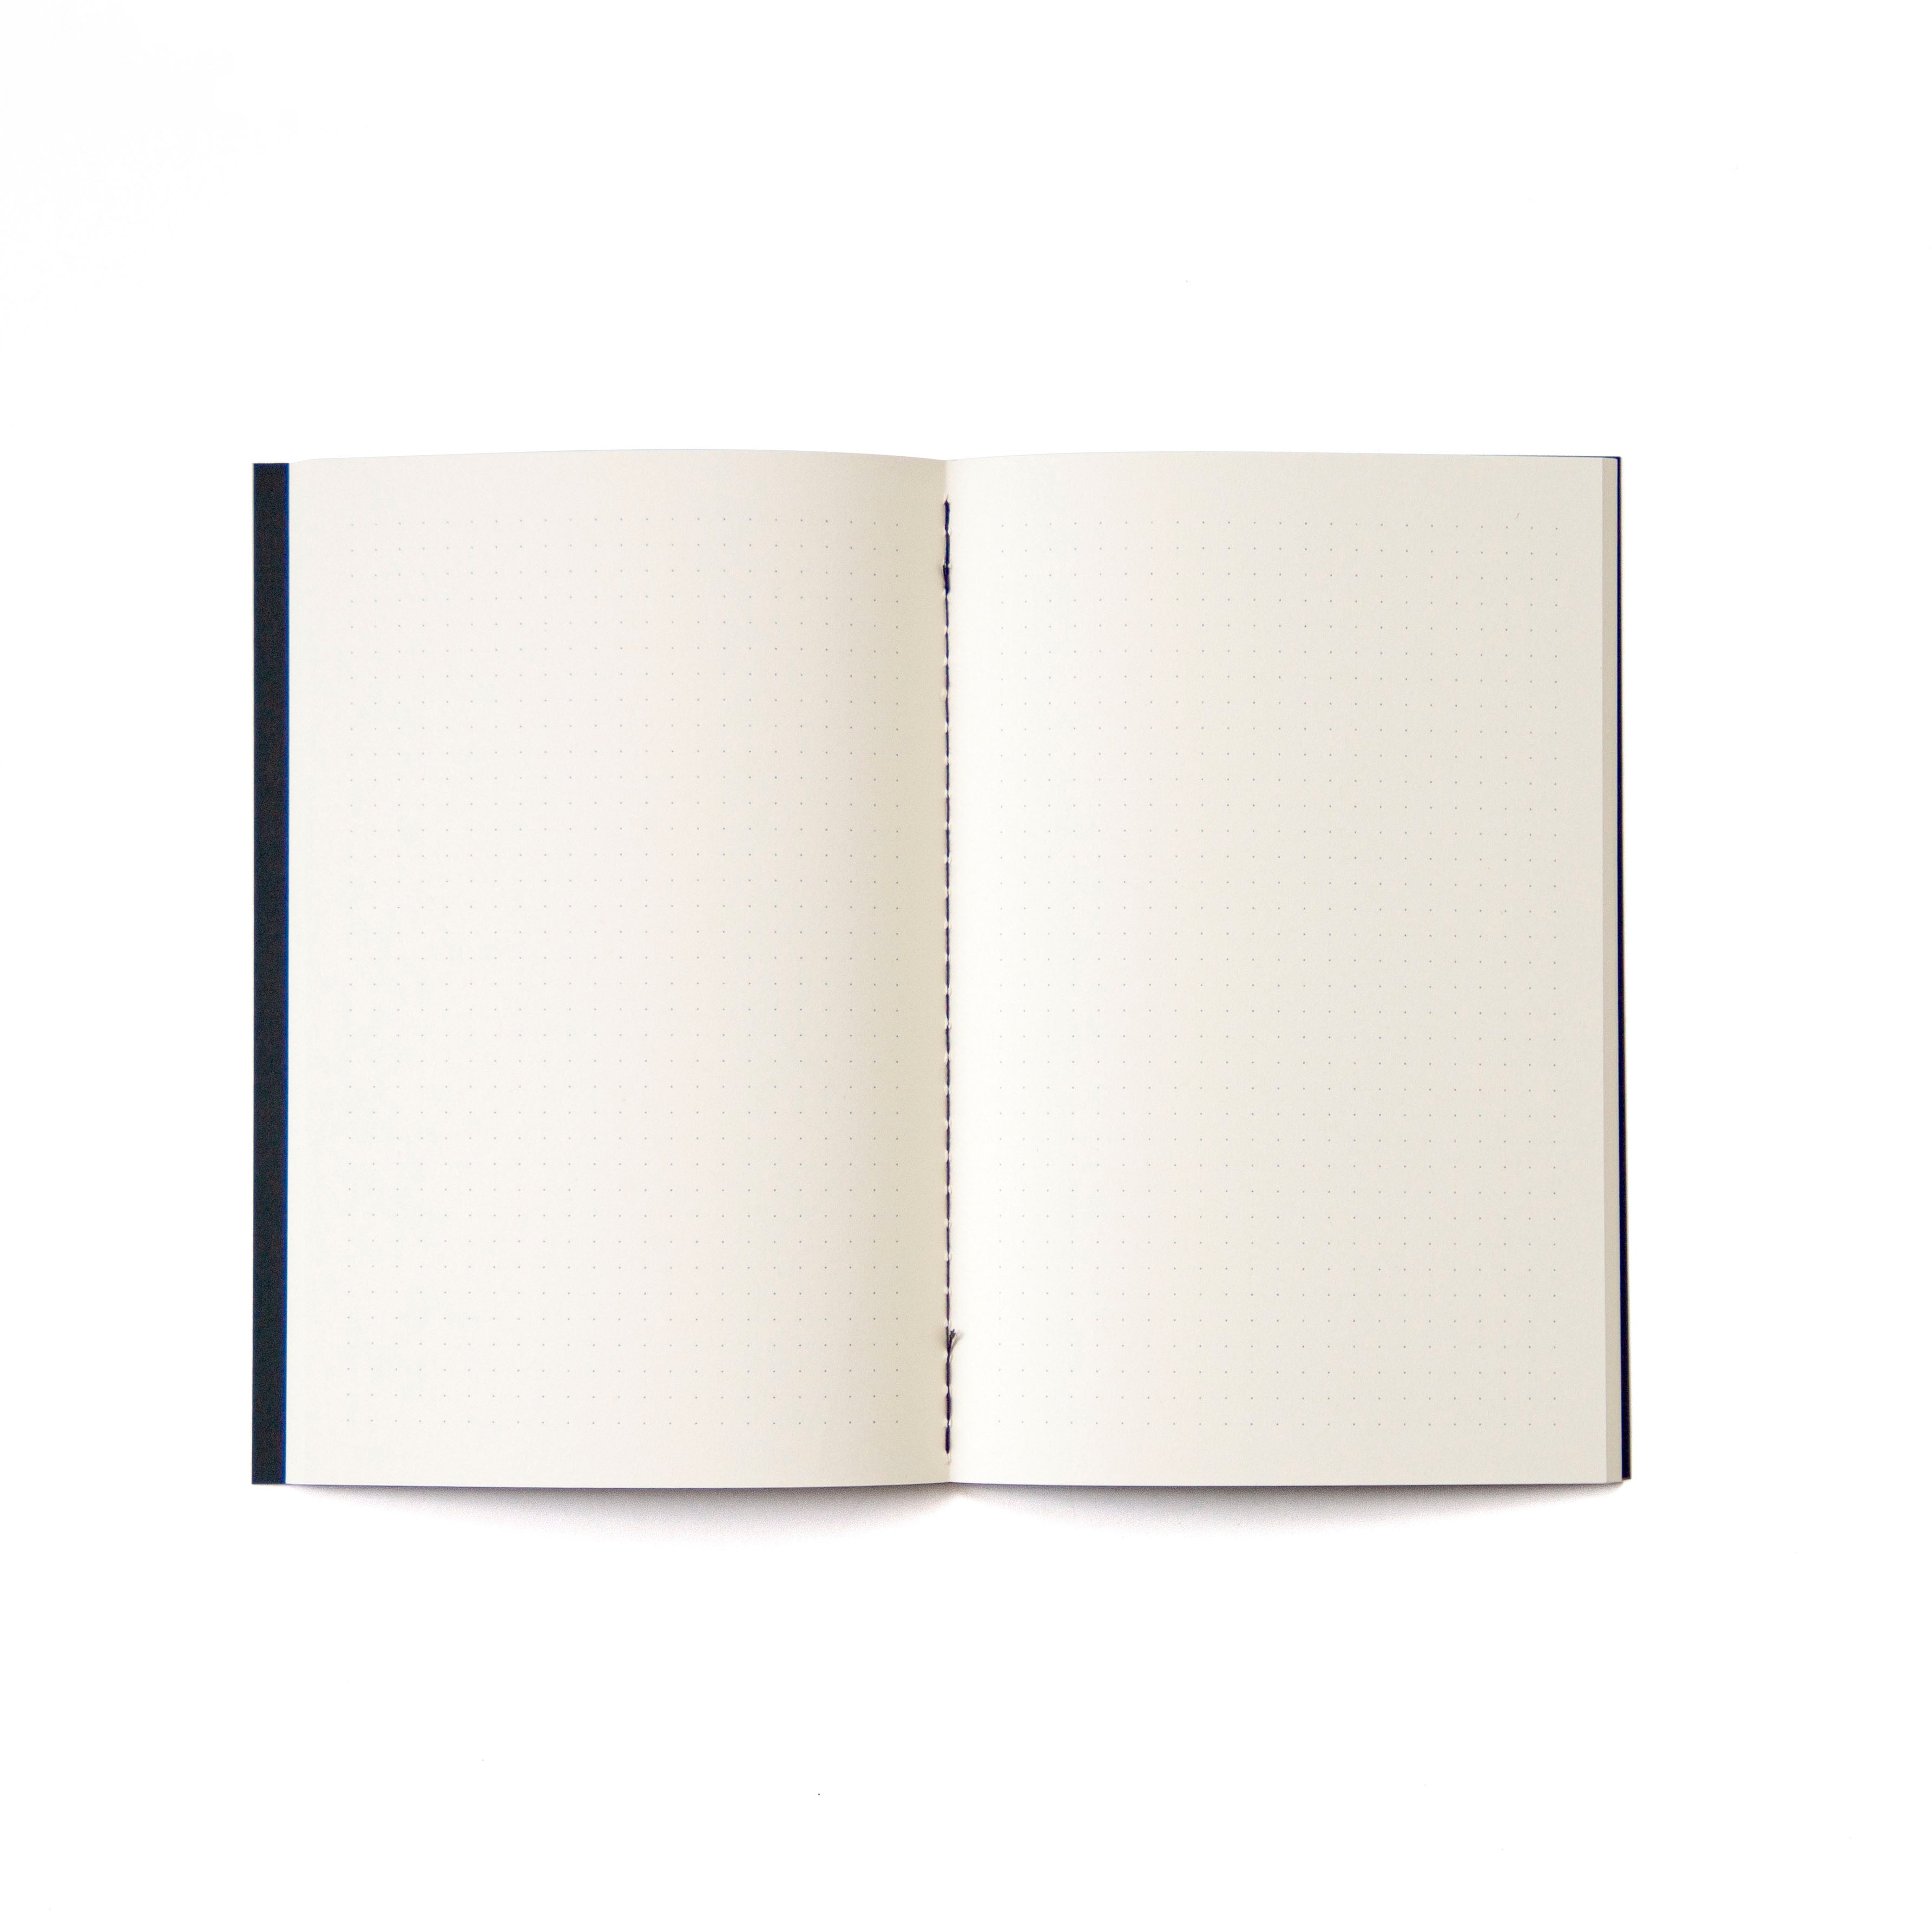 Open "Private property" dotted notebook. Binding with black thread.